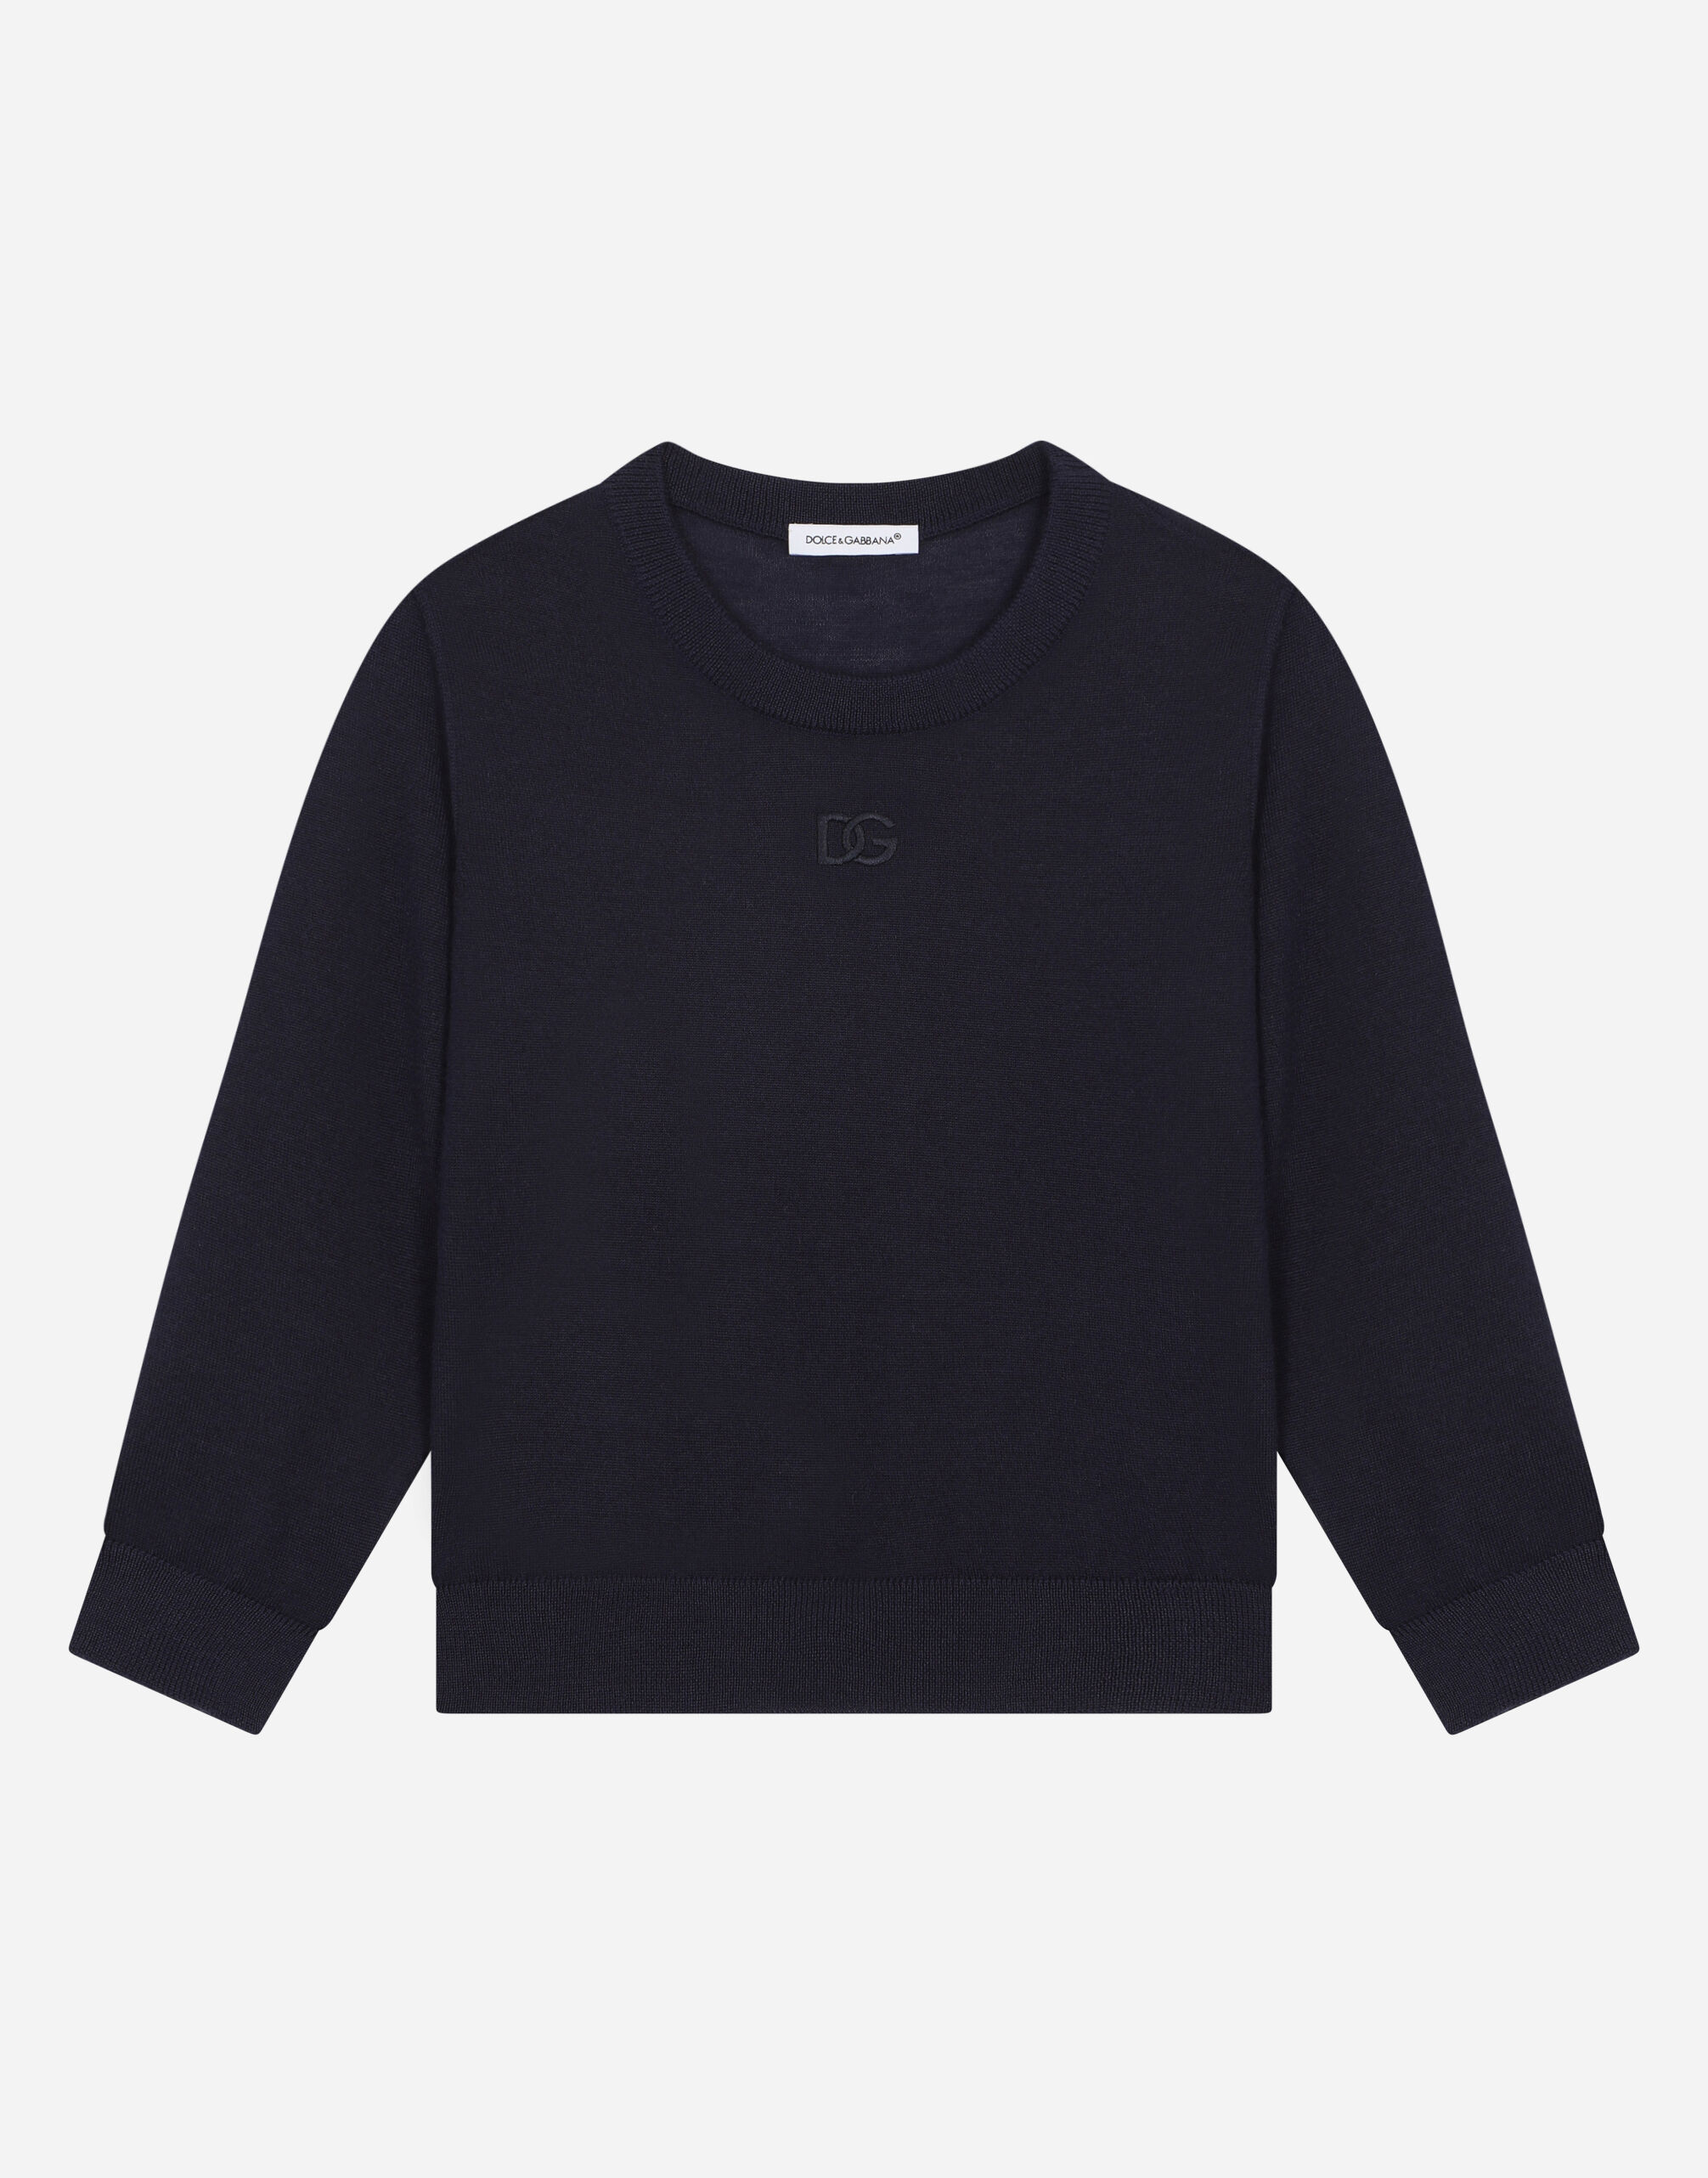 Dolce & Gabbana Cashmere round-neck sweater with DG logo embroidery Black L42Q95LY051